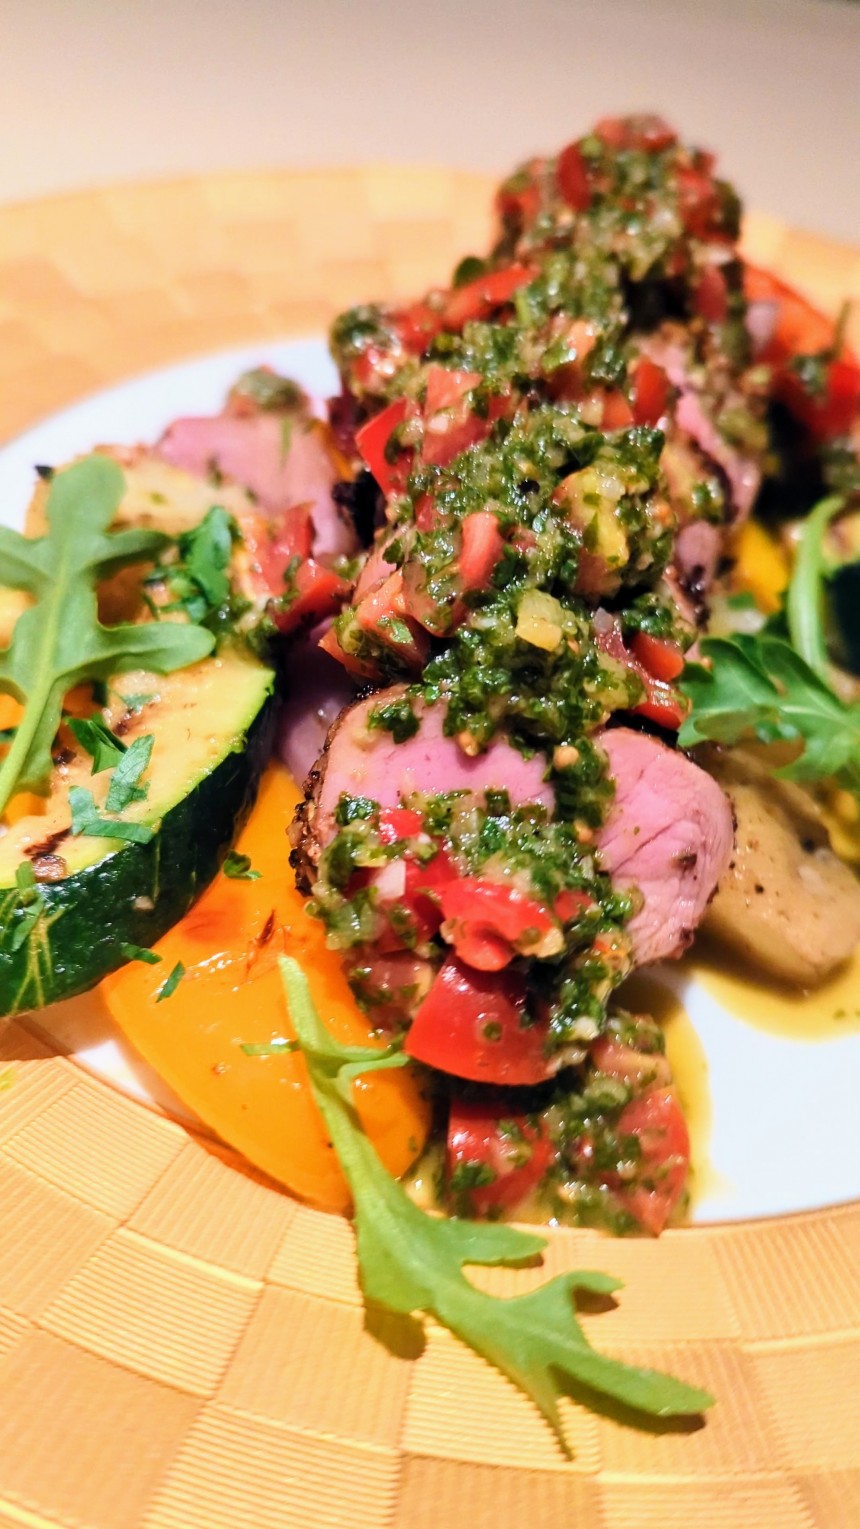 10 Minutes Red Pepper Chimichurri Sauce...